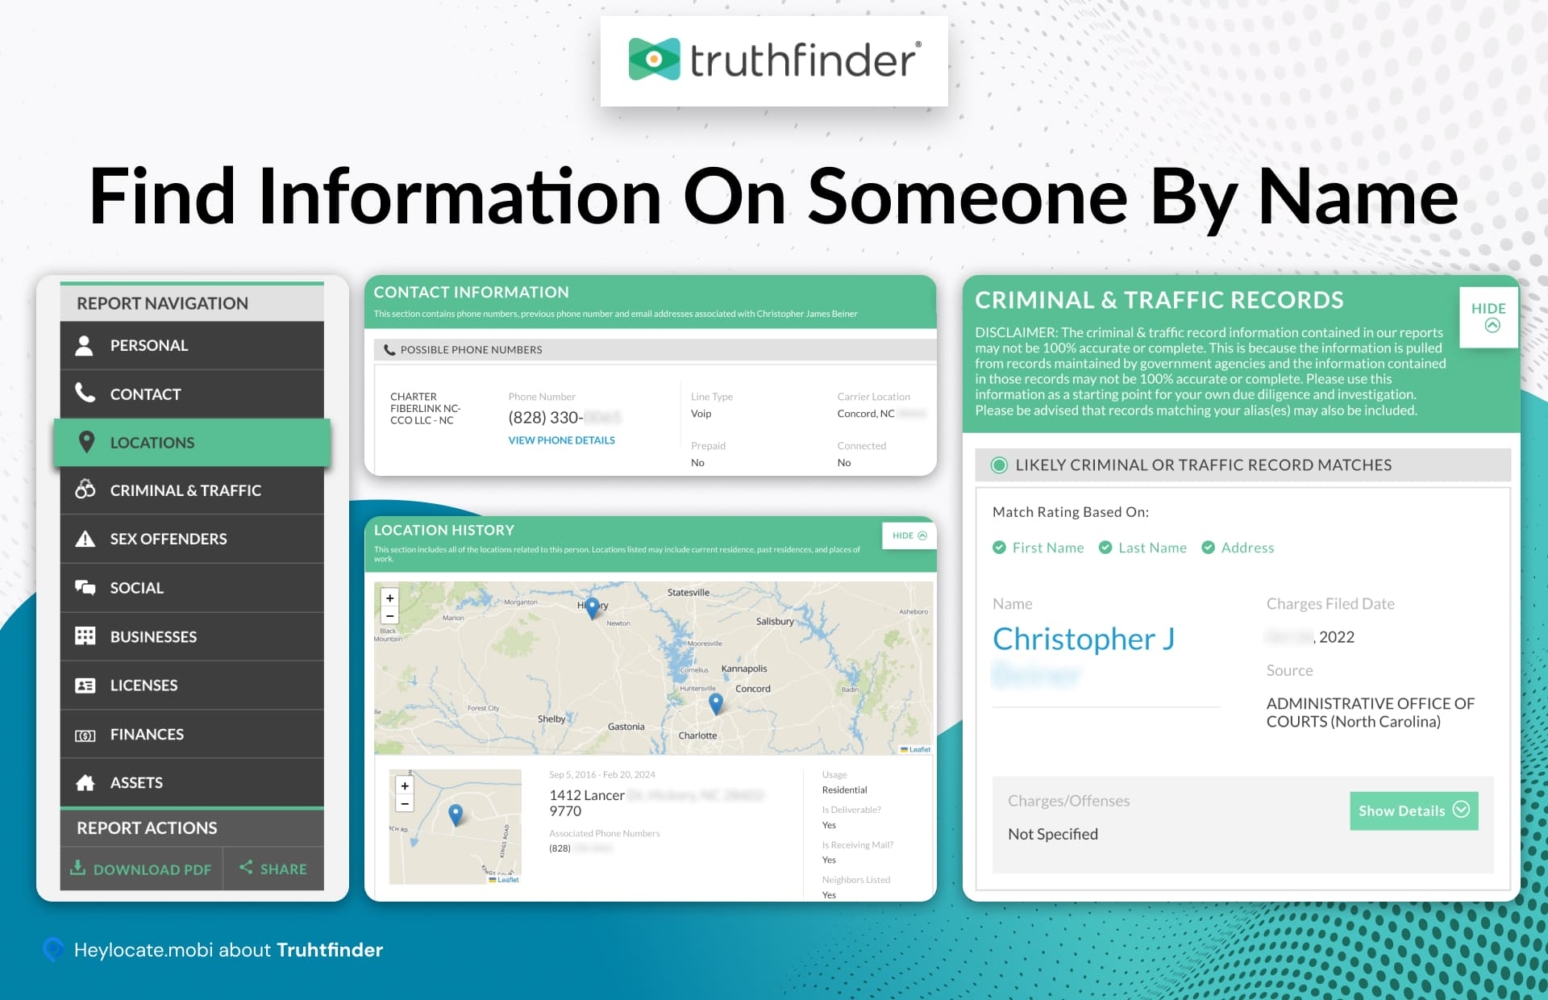 A screenshot showcasing the Truthfinder interface with detailed sections for report navigation including personal, contact, locations, criminal & traffic, among others. The main focus is on finding information by name with sections on contact information, location history, and criminal & traffic records visible. The interface provides a user-friendly layout with clear, organized modules for easy access to various types of public records.